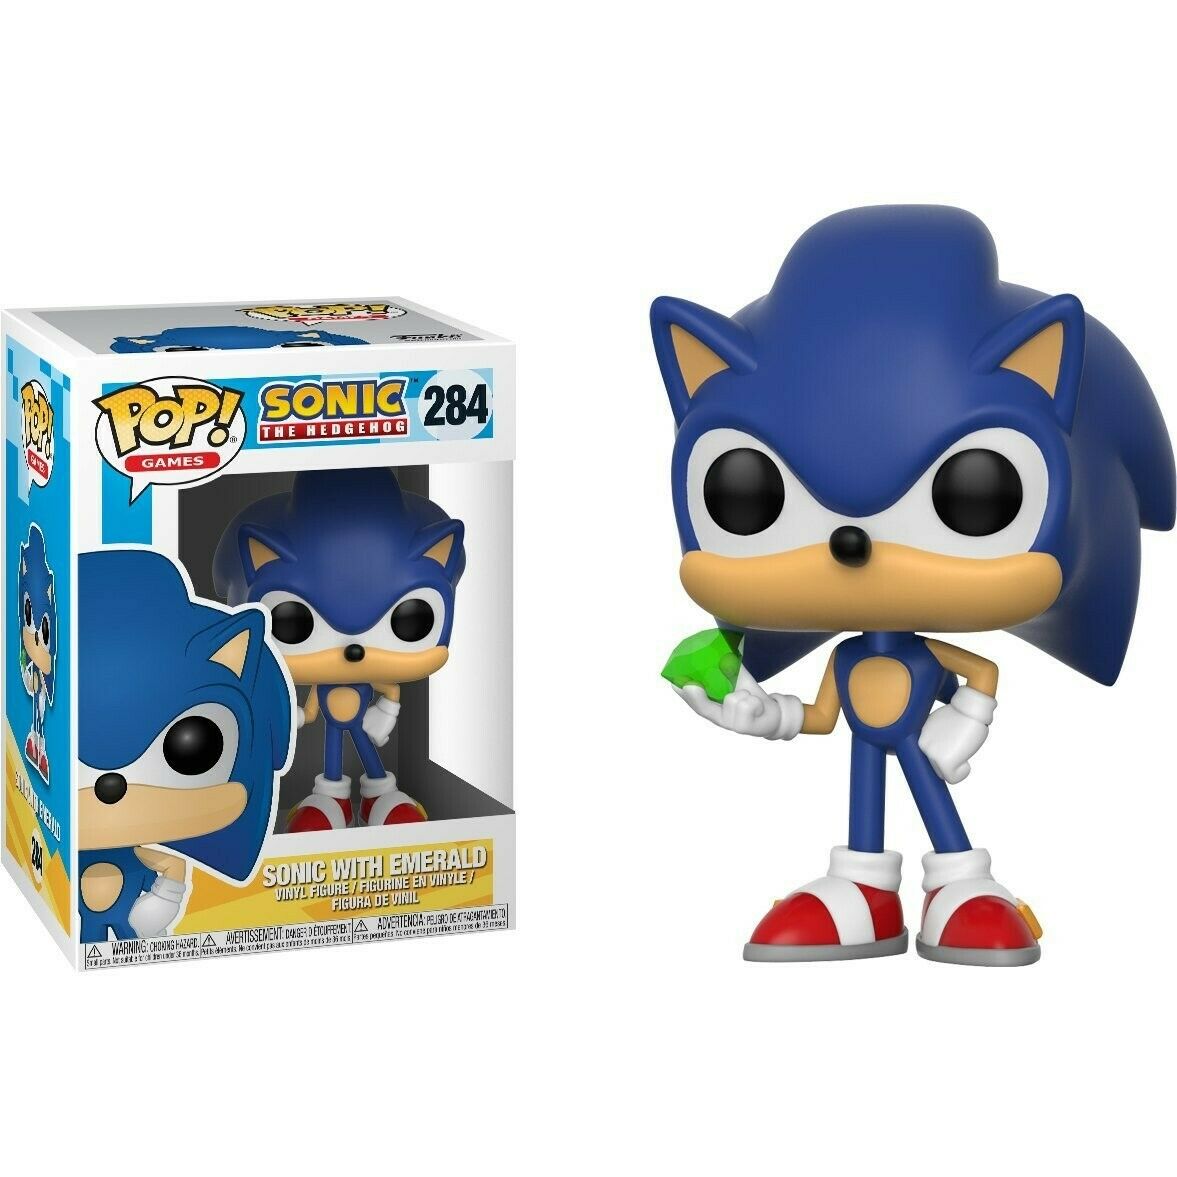 Sonic The Hedgehog - Pop! #284 - Sonic with Emerald